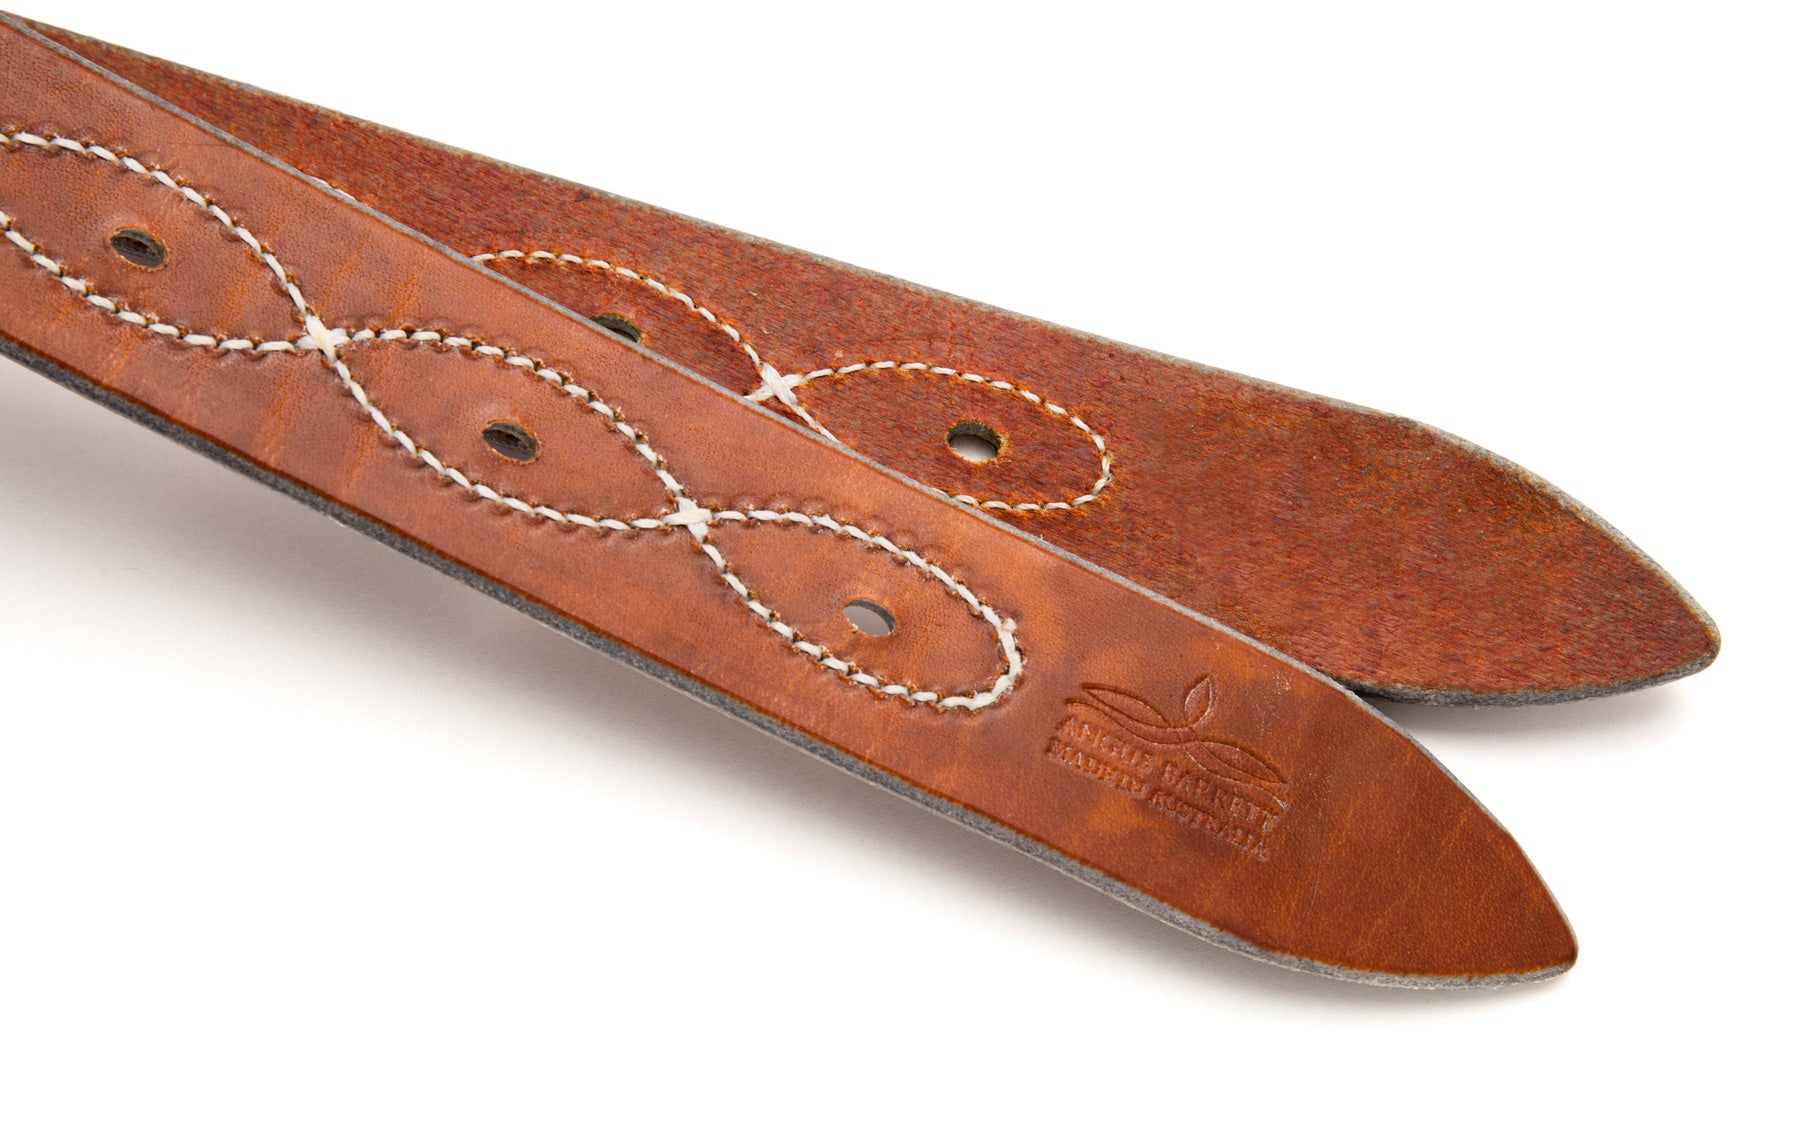 Angus Barrett Saddlery Girth Point has reinforced holes to prevent tearing